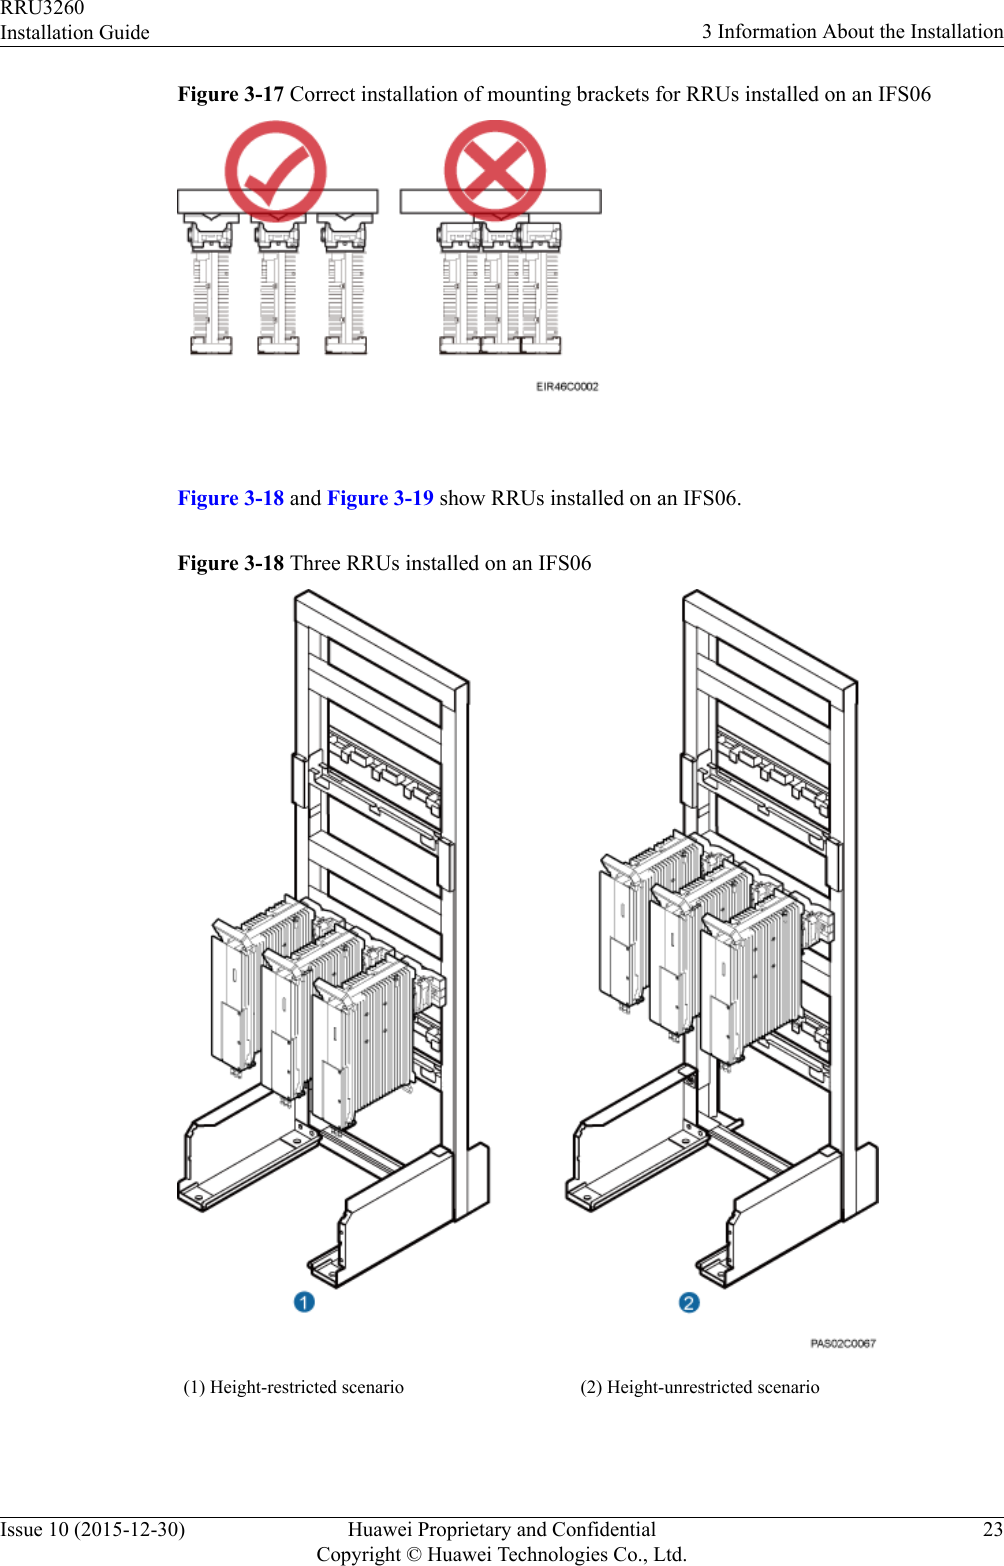 Figure 3-17 Correct installation of mounting brackets for RRUs installed on an IFS06 Figure 3-18 and Figure 3-19 show RRUs installed on an IFS06.Figure 3-18 Three RRUs installed on an IFS06(1) Height-restricted scenario (2) Height-unrestricted scenario RRU3260Installation Guide 3 Information About the InstallationIssue 10 (2015-12-30) Huawei Proprietary and ConfidentialCopyright © Huawei Technologies Co., Ltd.23